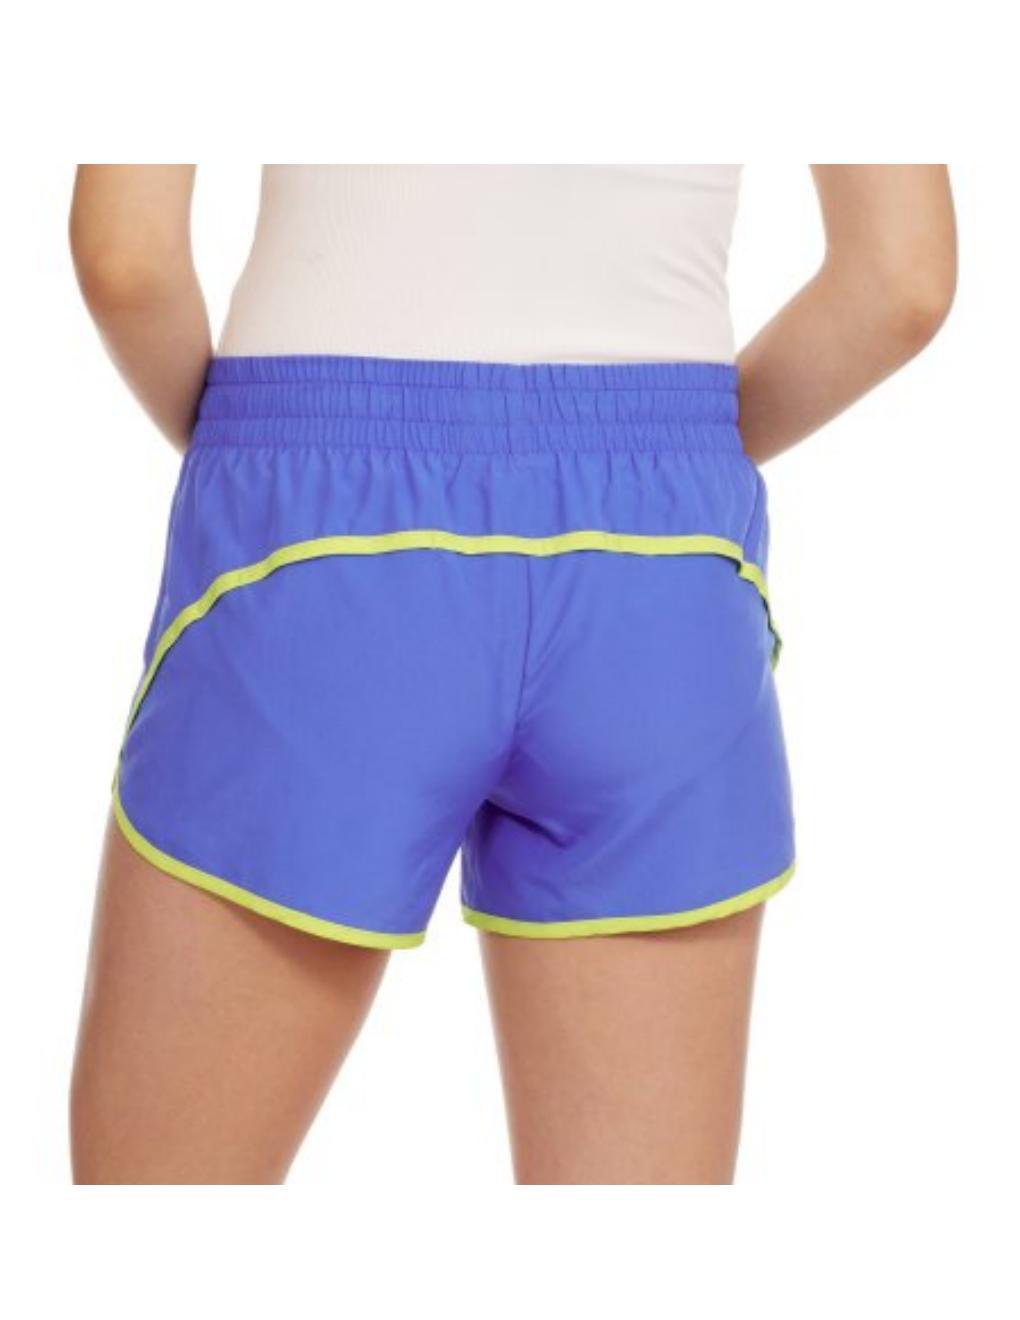 NEW Danskin Now Womens Active Dolphin Woven Running Shorts LINED SMALL Blue